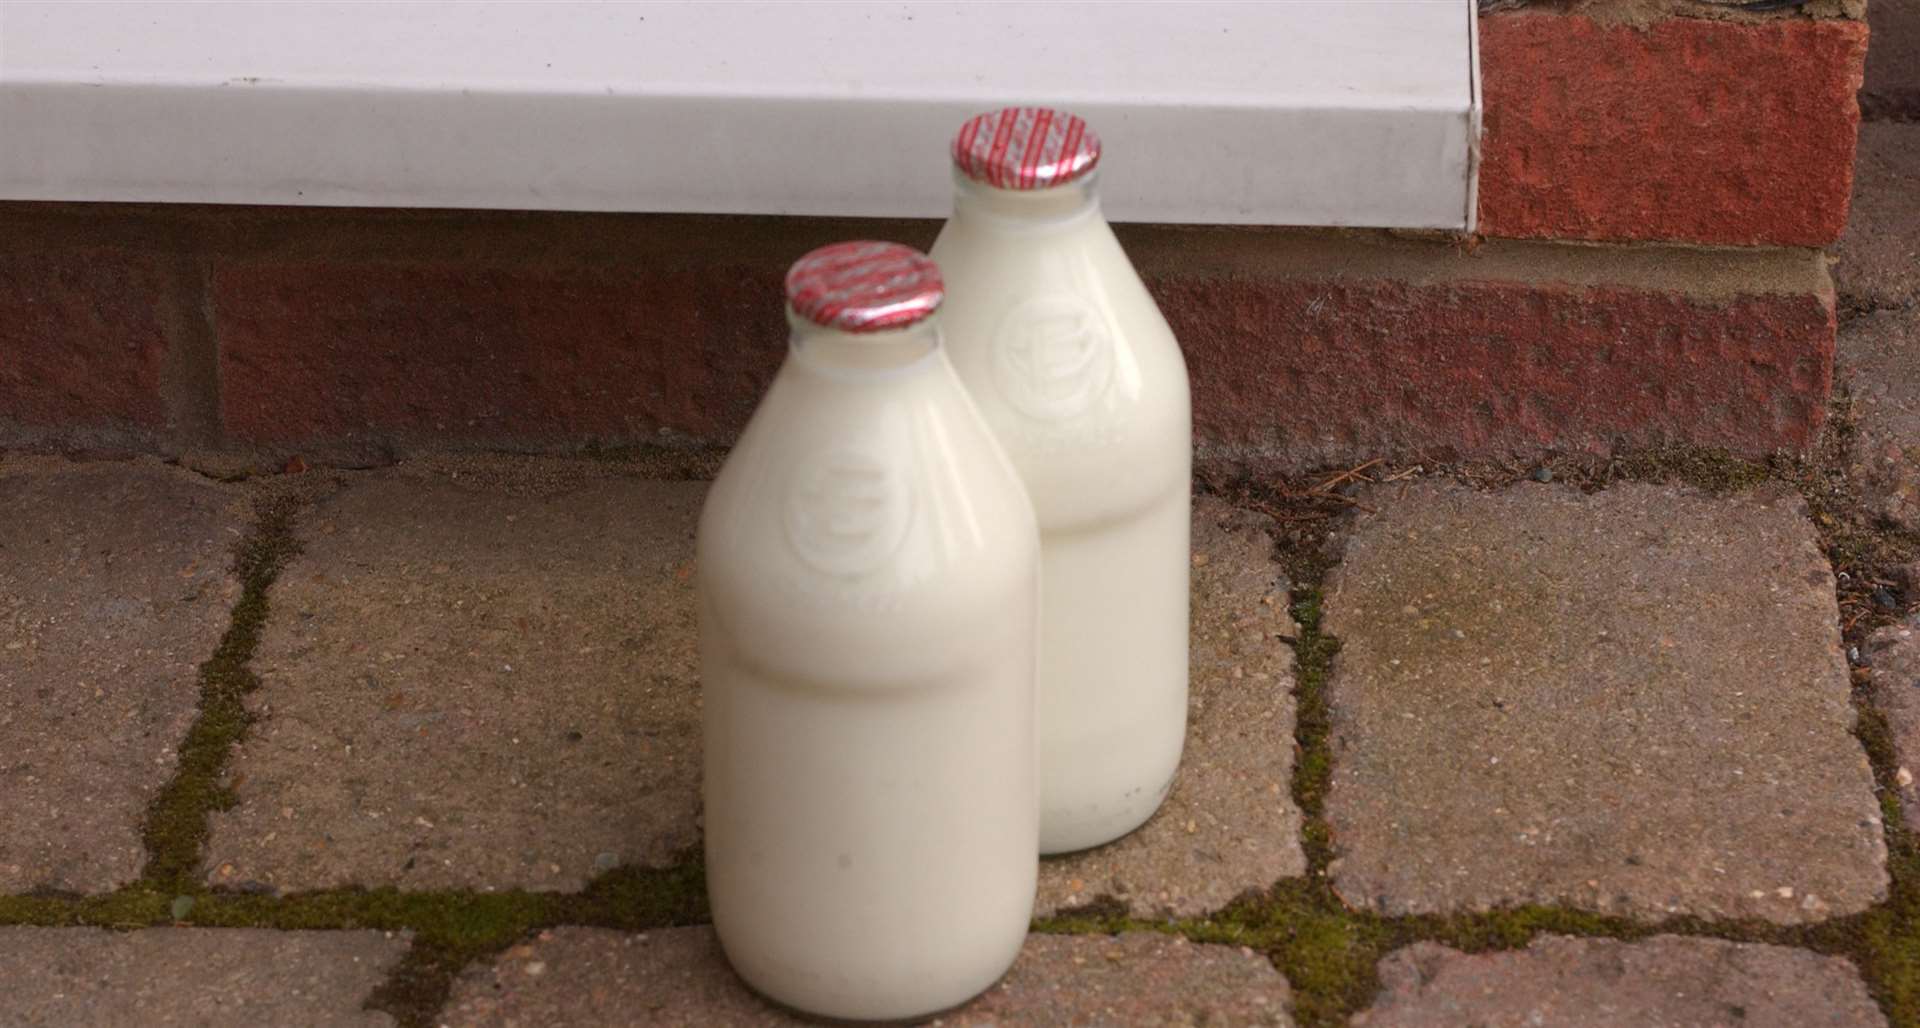 Milk and other dairy items have been reported stolen. Picture: Jim Bell